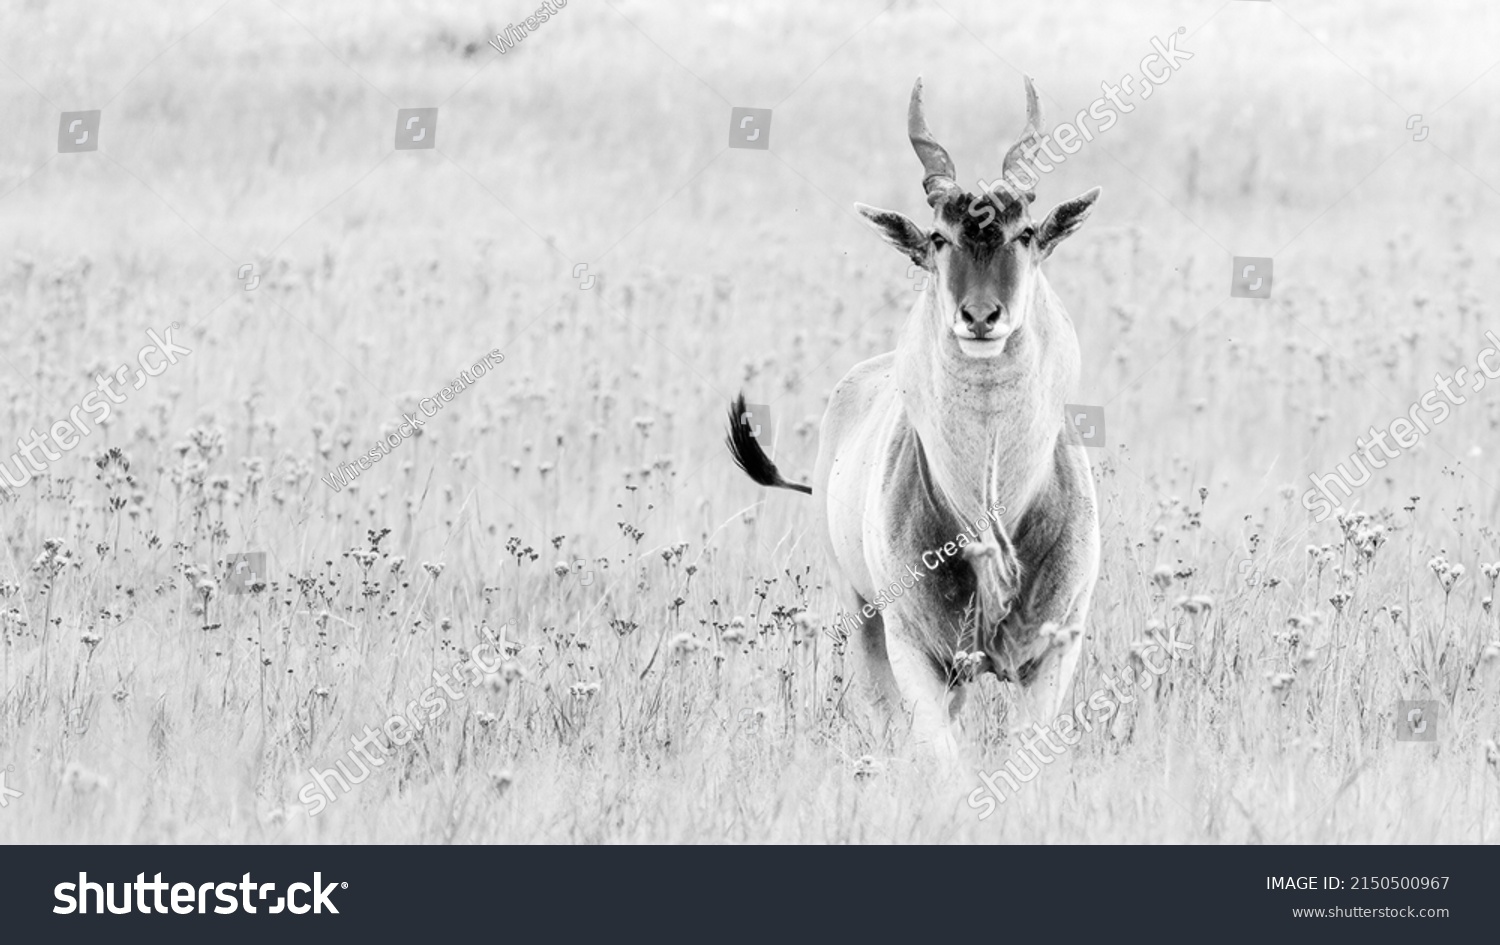 Eland antelope standing in a grassland in Africa  #2150500967